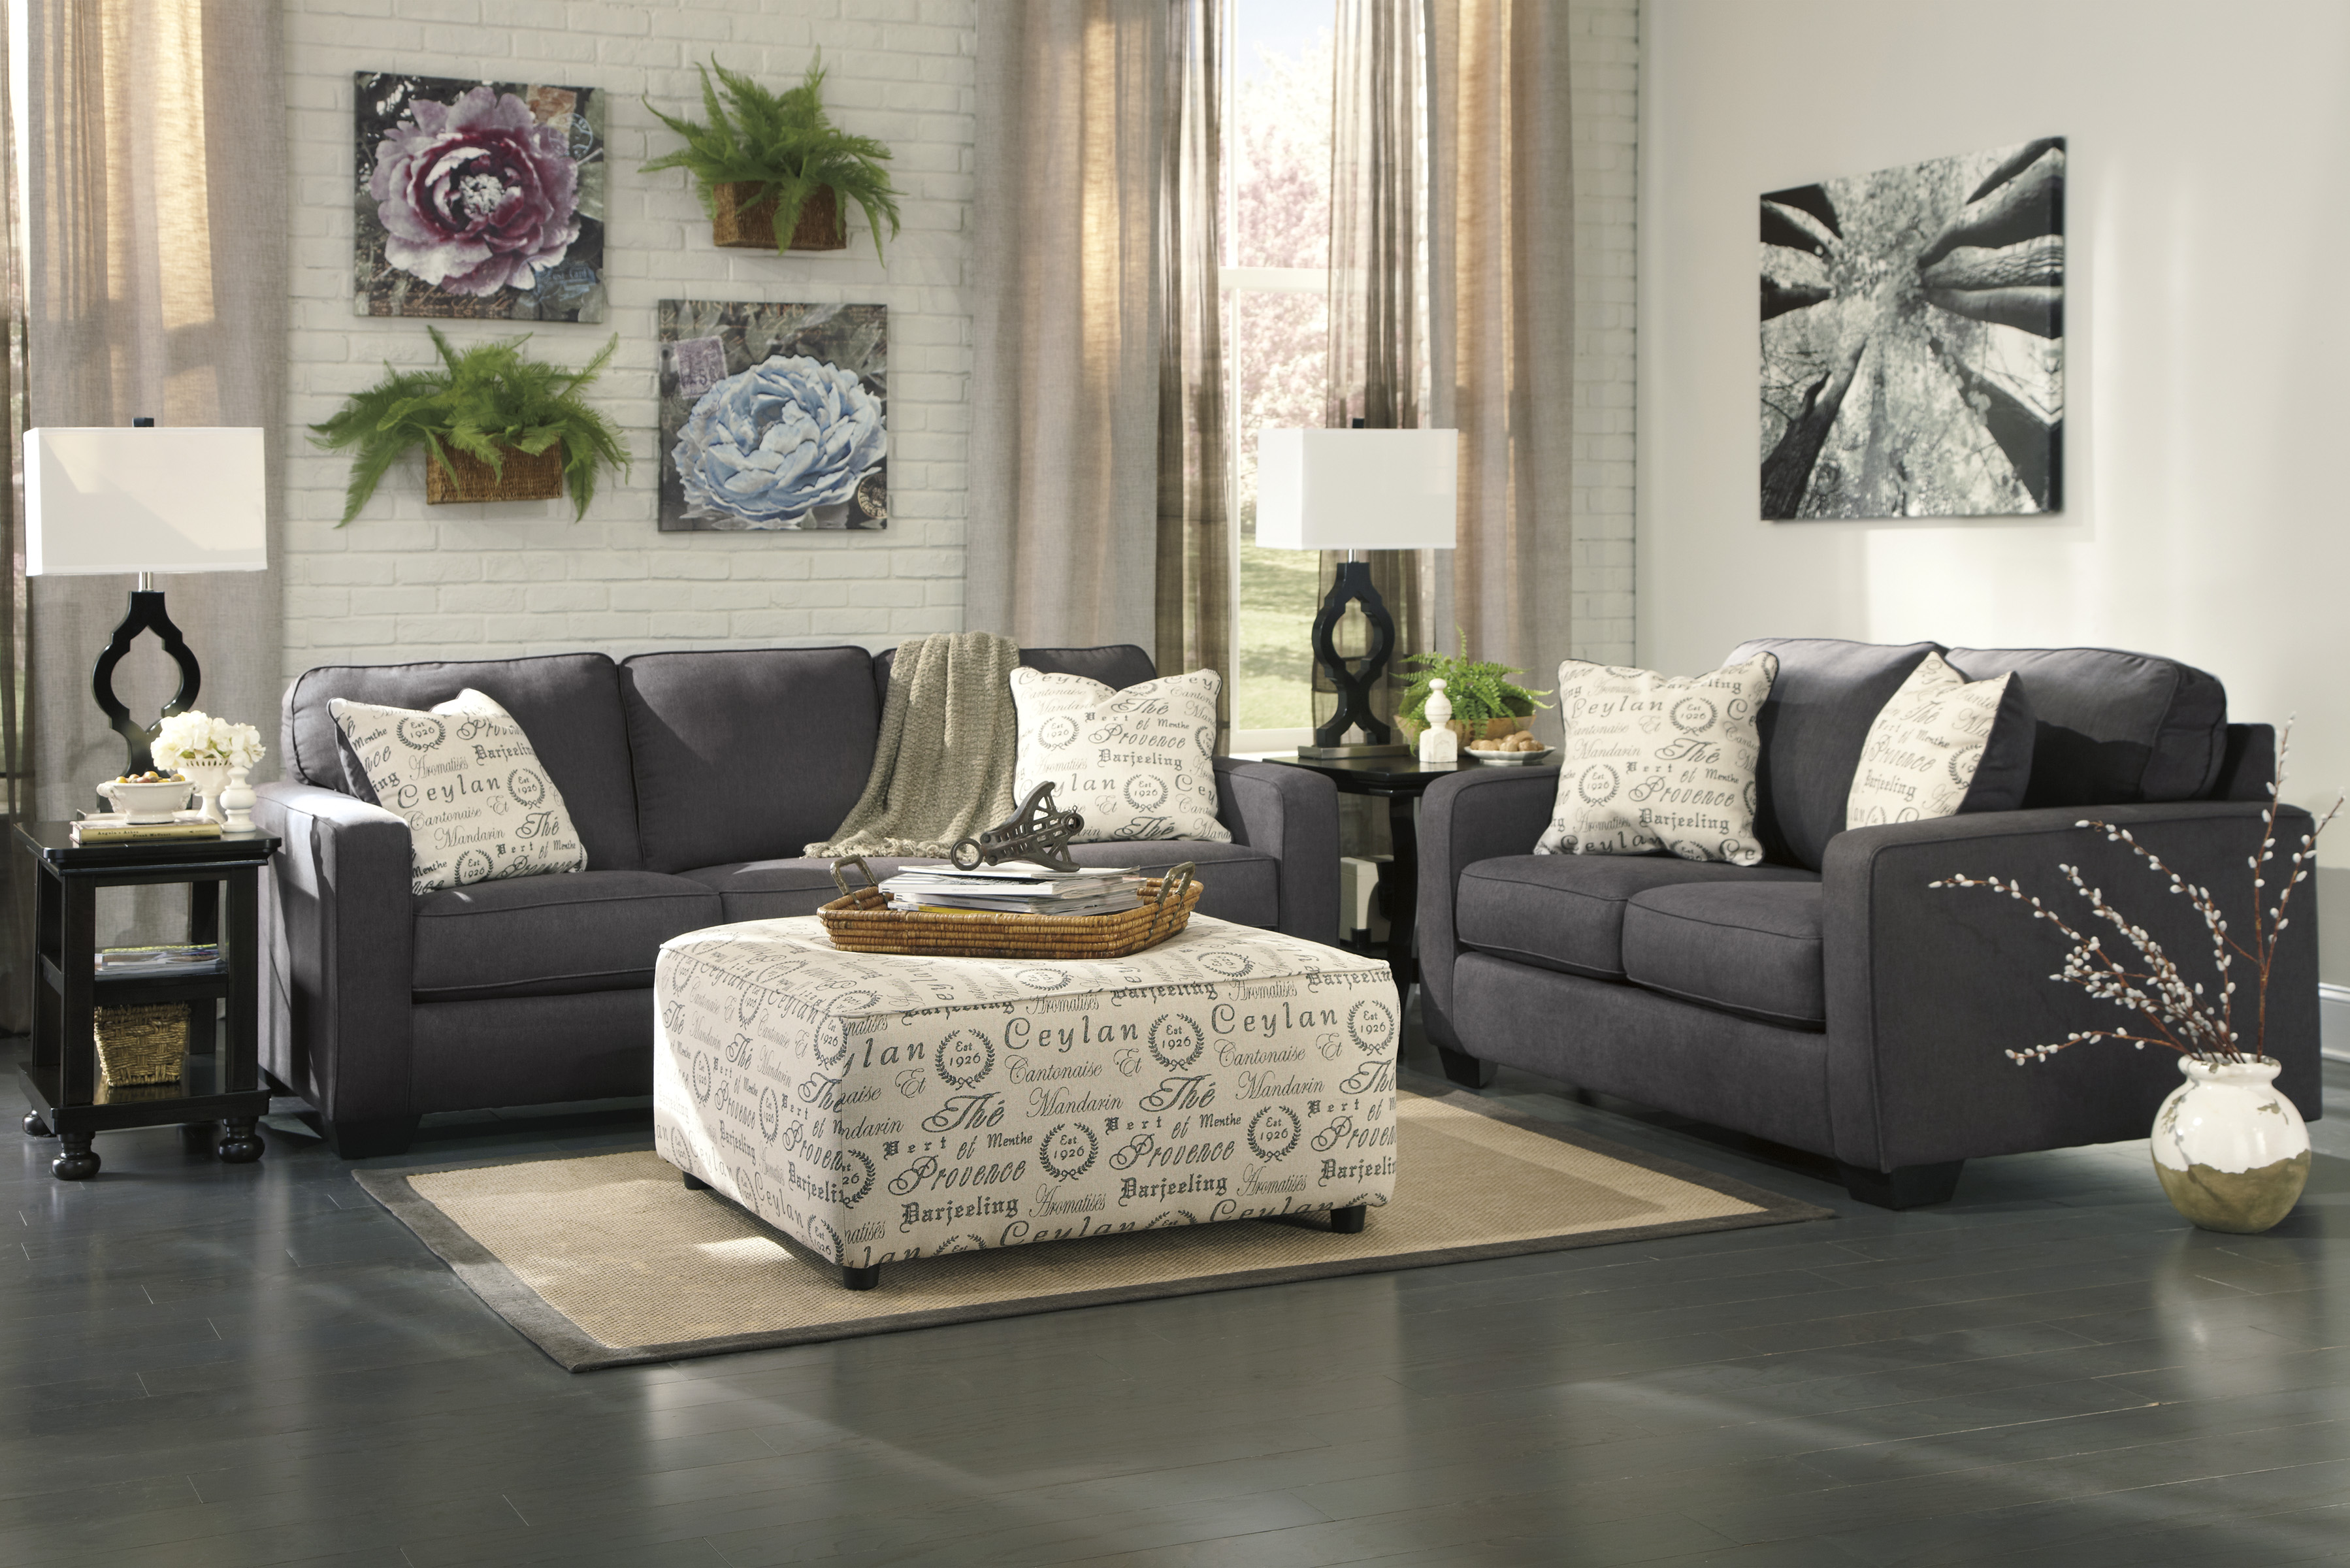 Save BIG on Sofas, Living Room Sets and Sectionals From Your Local Home